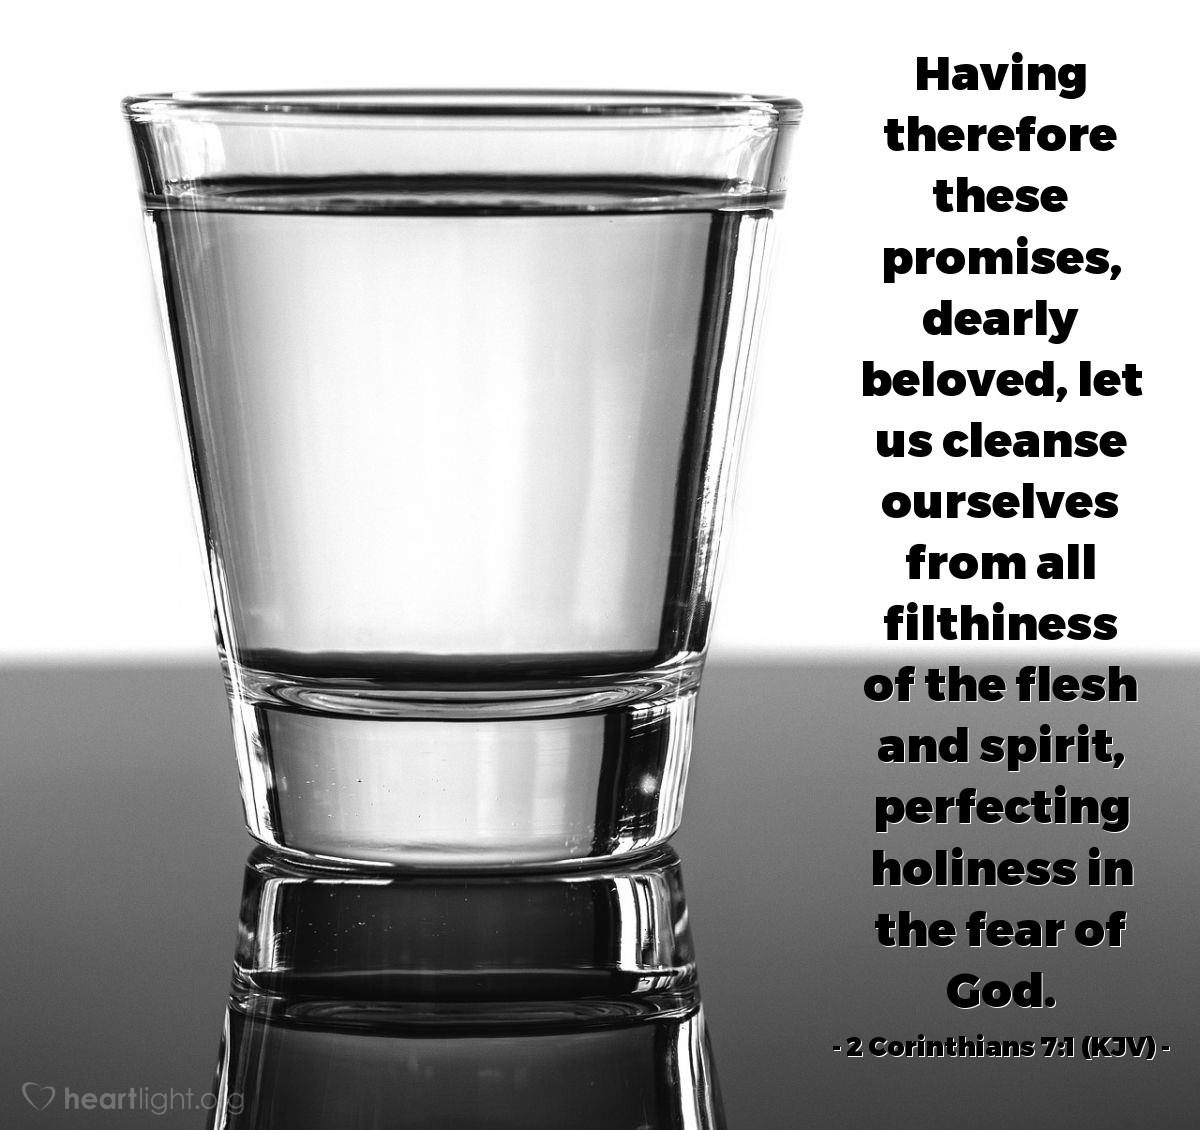 Illustration of 2 Corinthians 7:1 (KJV) — Having therefore these promises, dearly beloved, let us cleanse ourselves from all filthiness of the flesh and spirit, perfecting holiness in the fear of God.